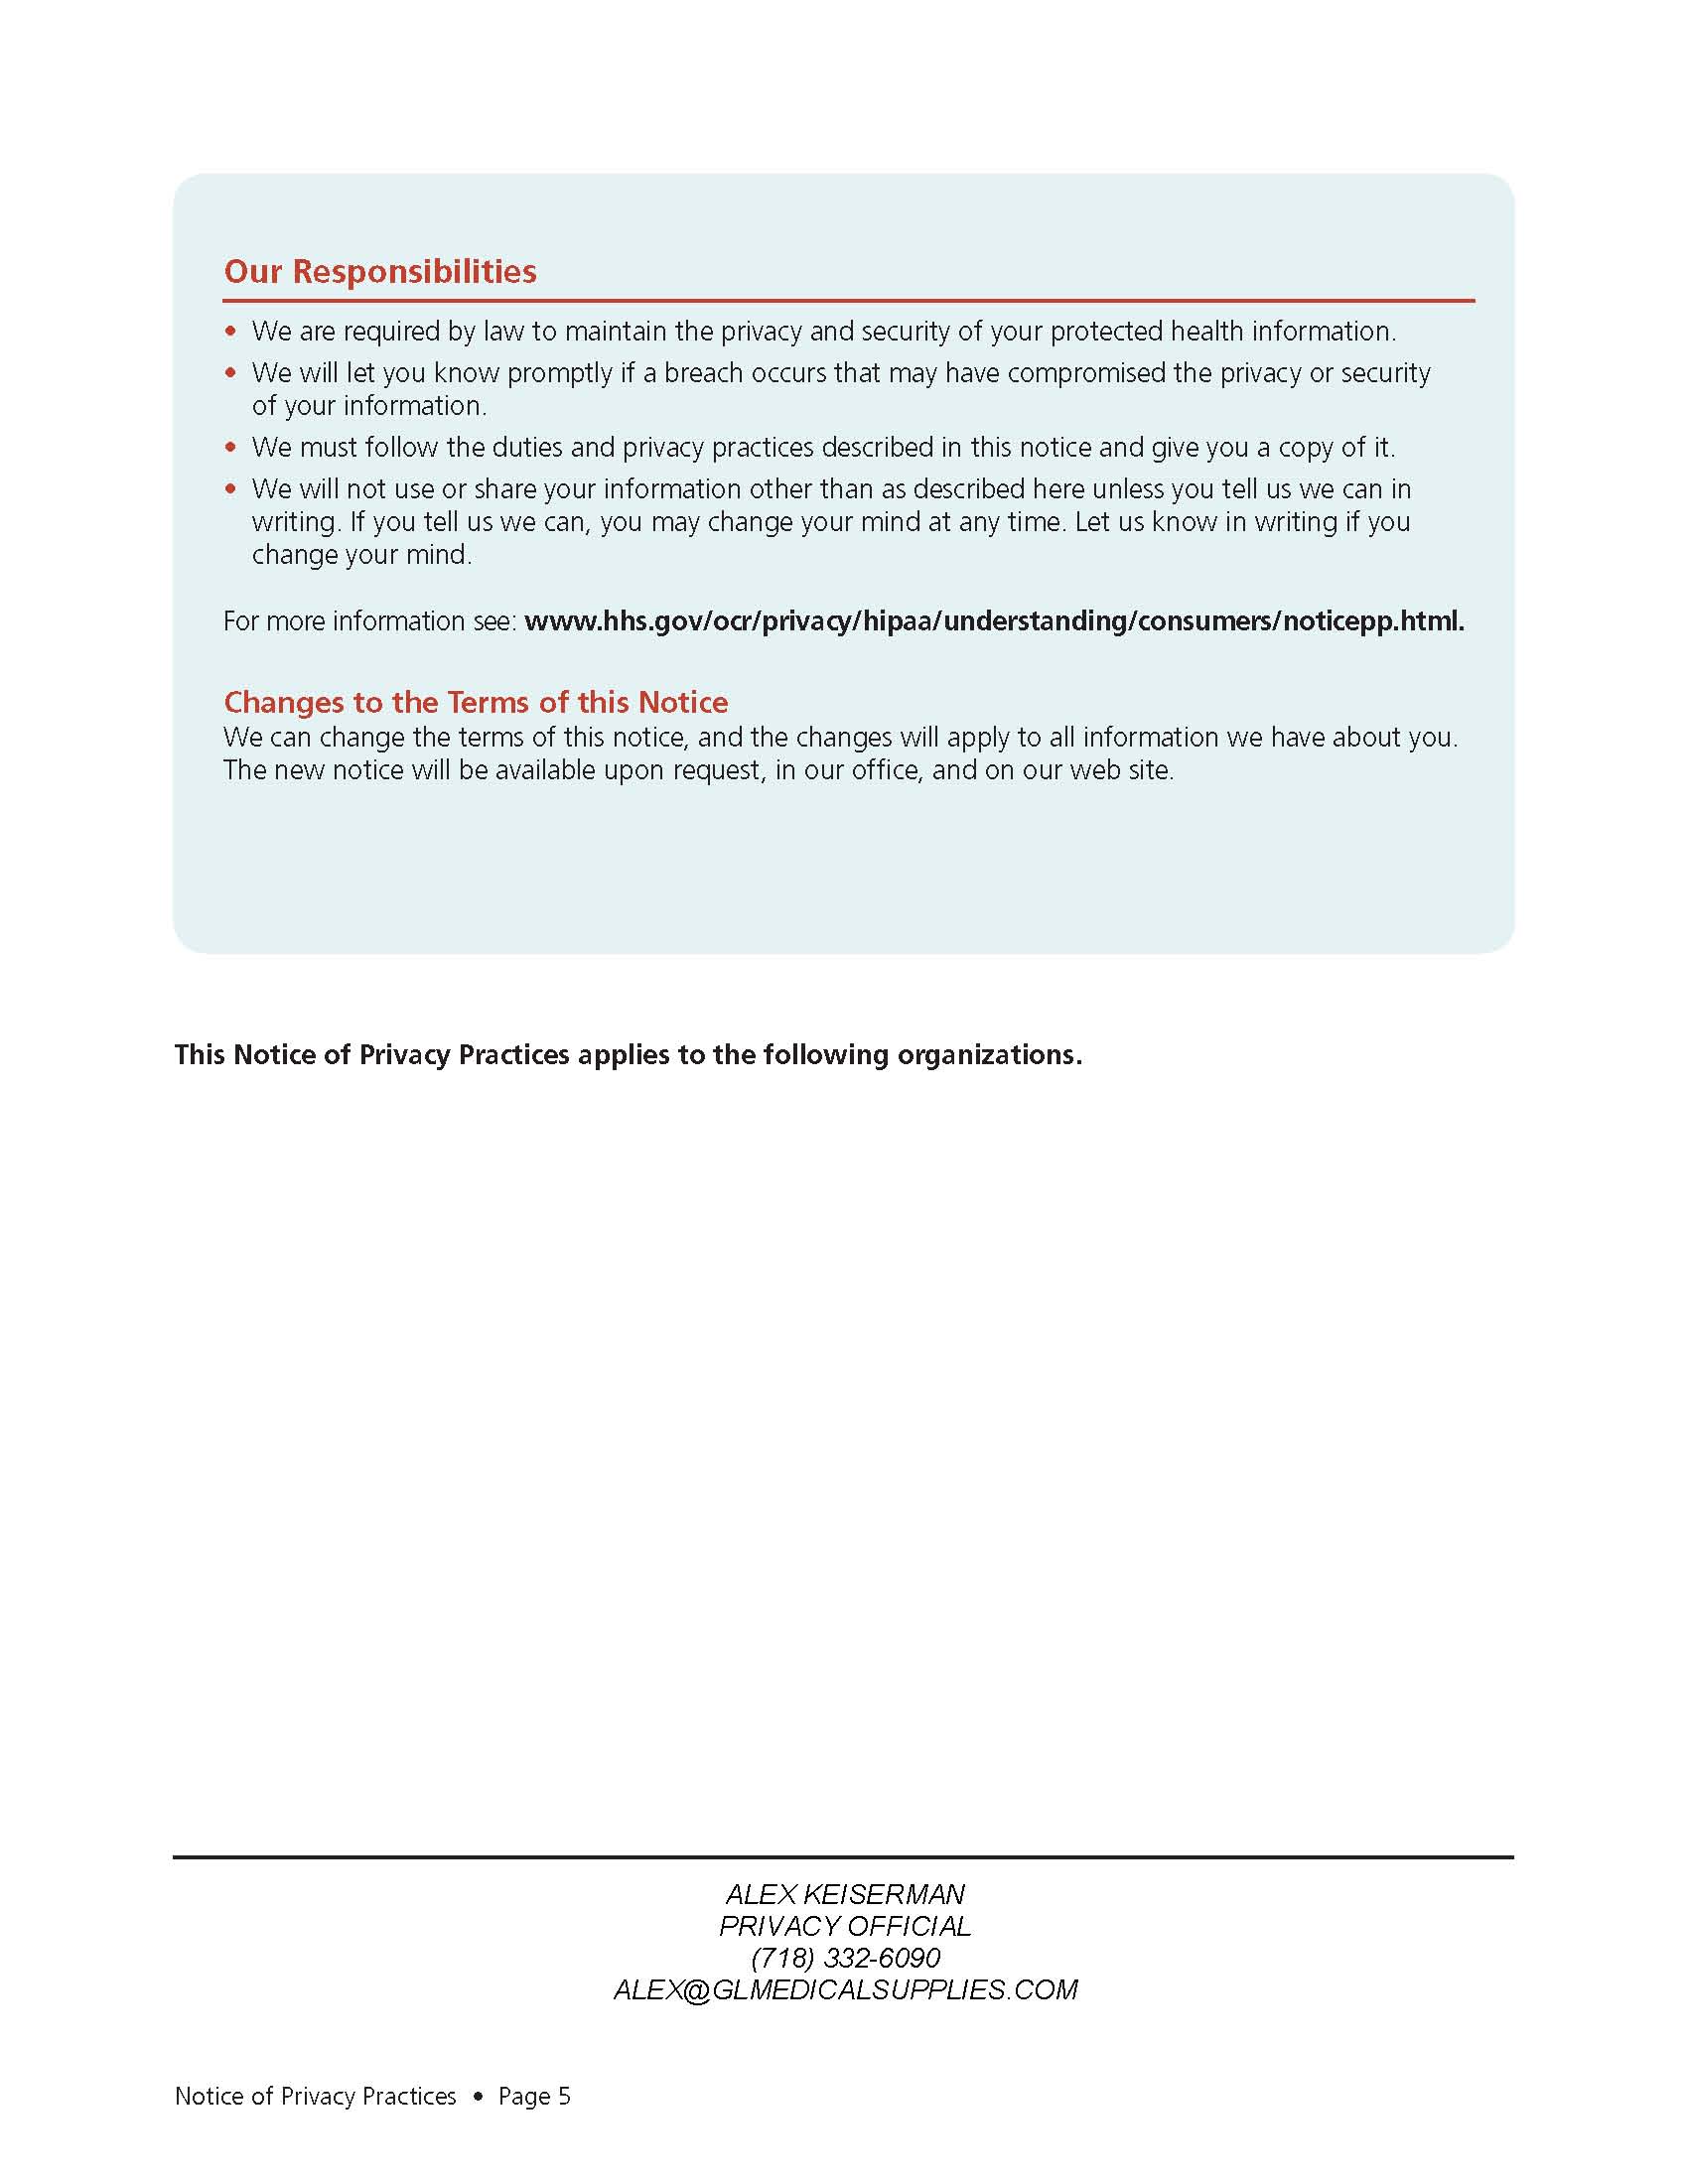 notice-of-privacy-practices-page-5.jpg